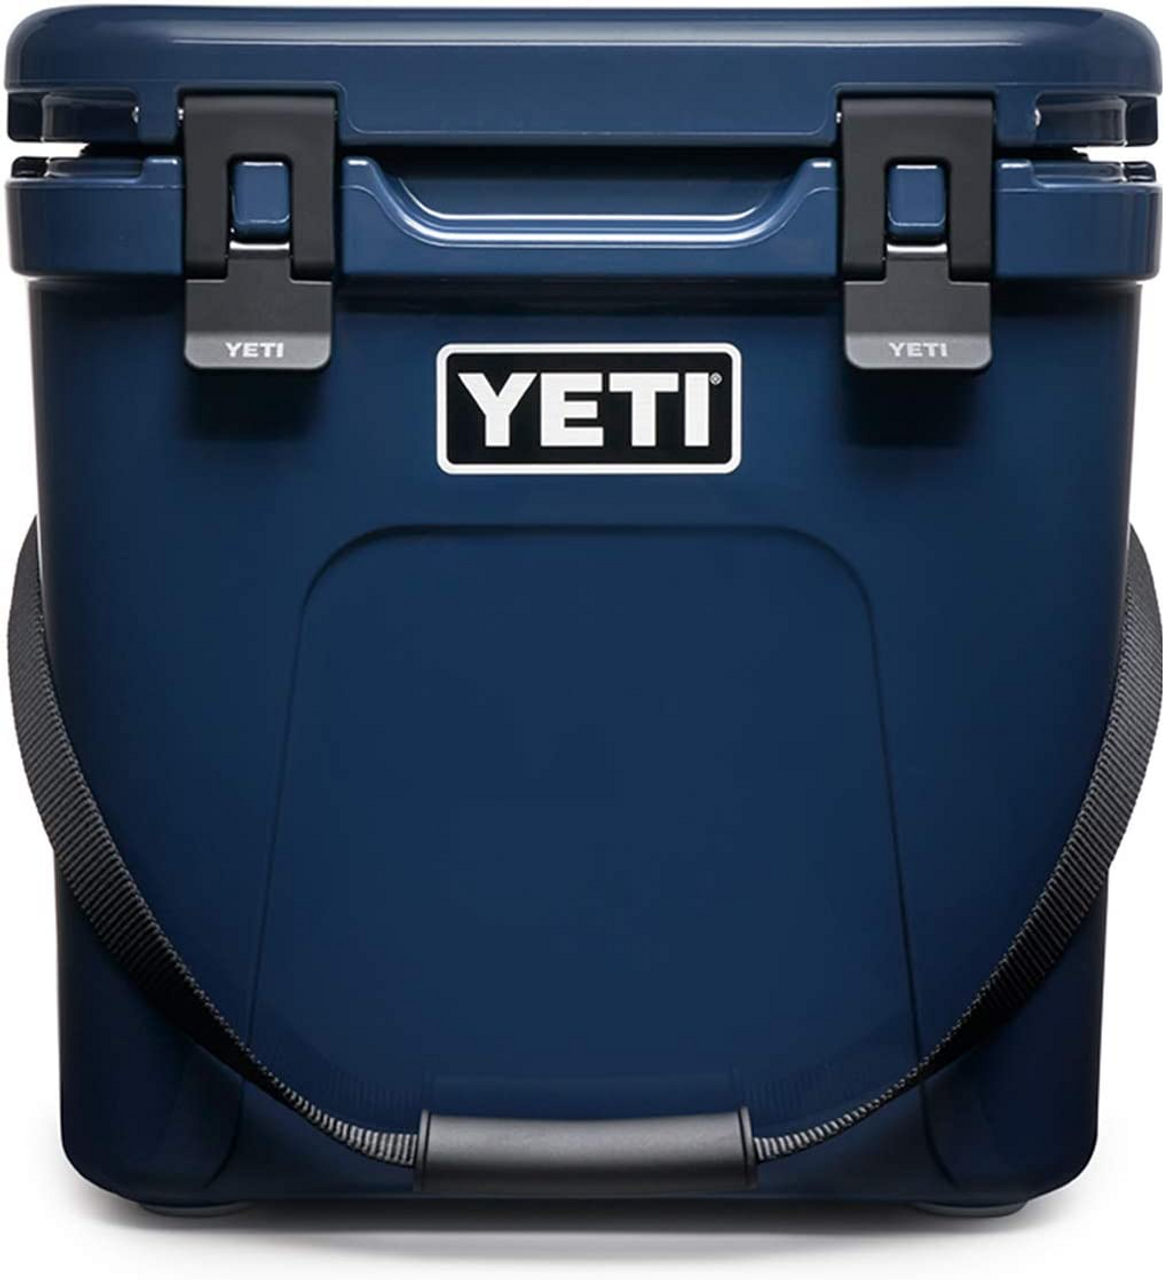 LIMITED EDITION Reef Blue Yeti Roadie 20 Cooler with 4 lb. Yeti